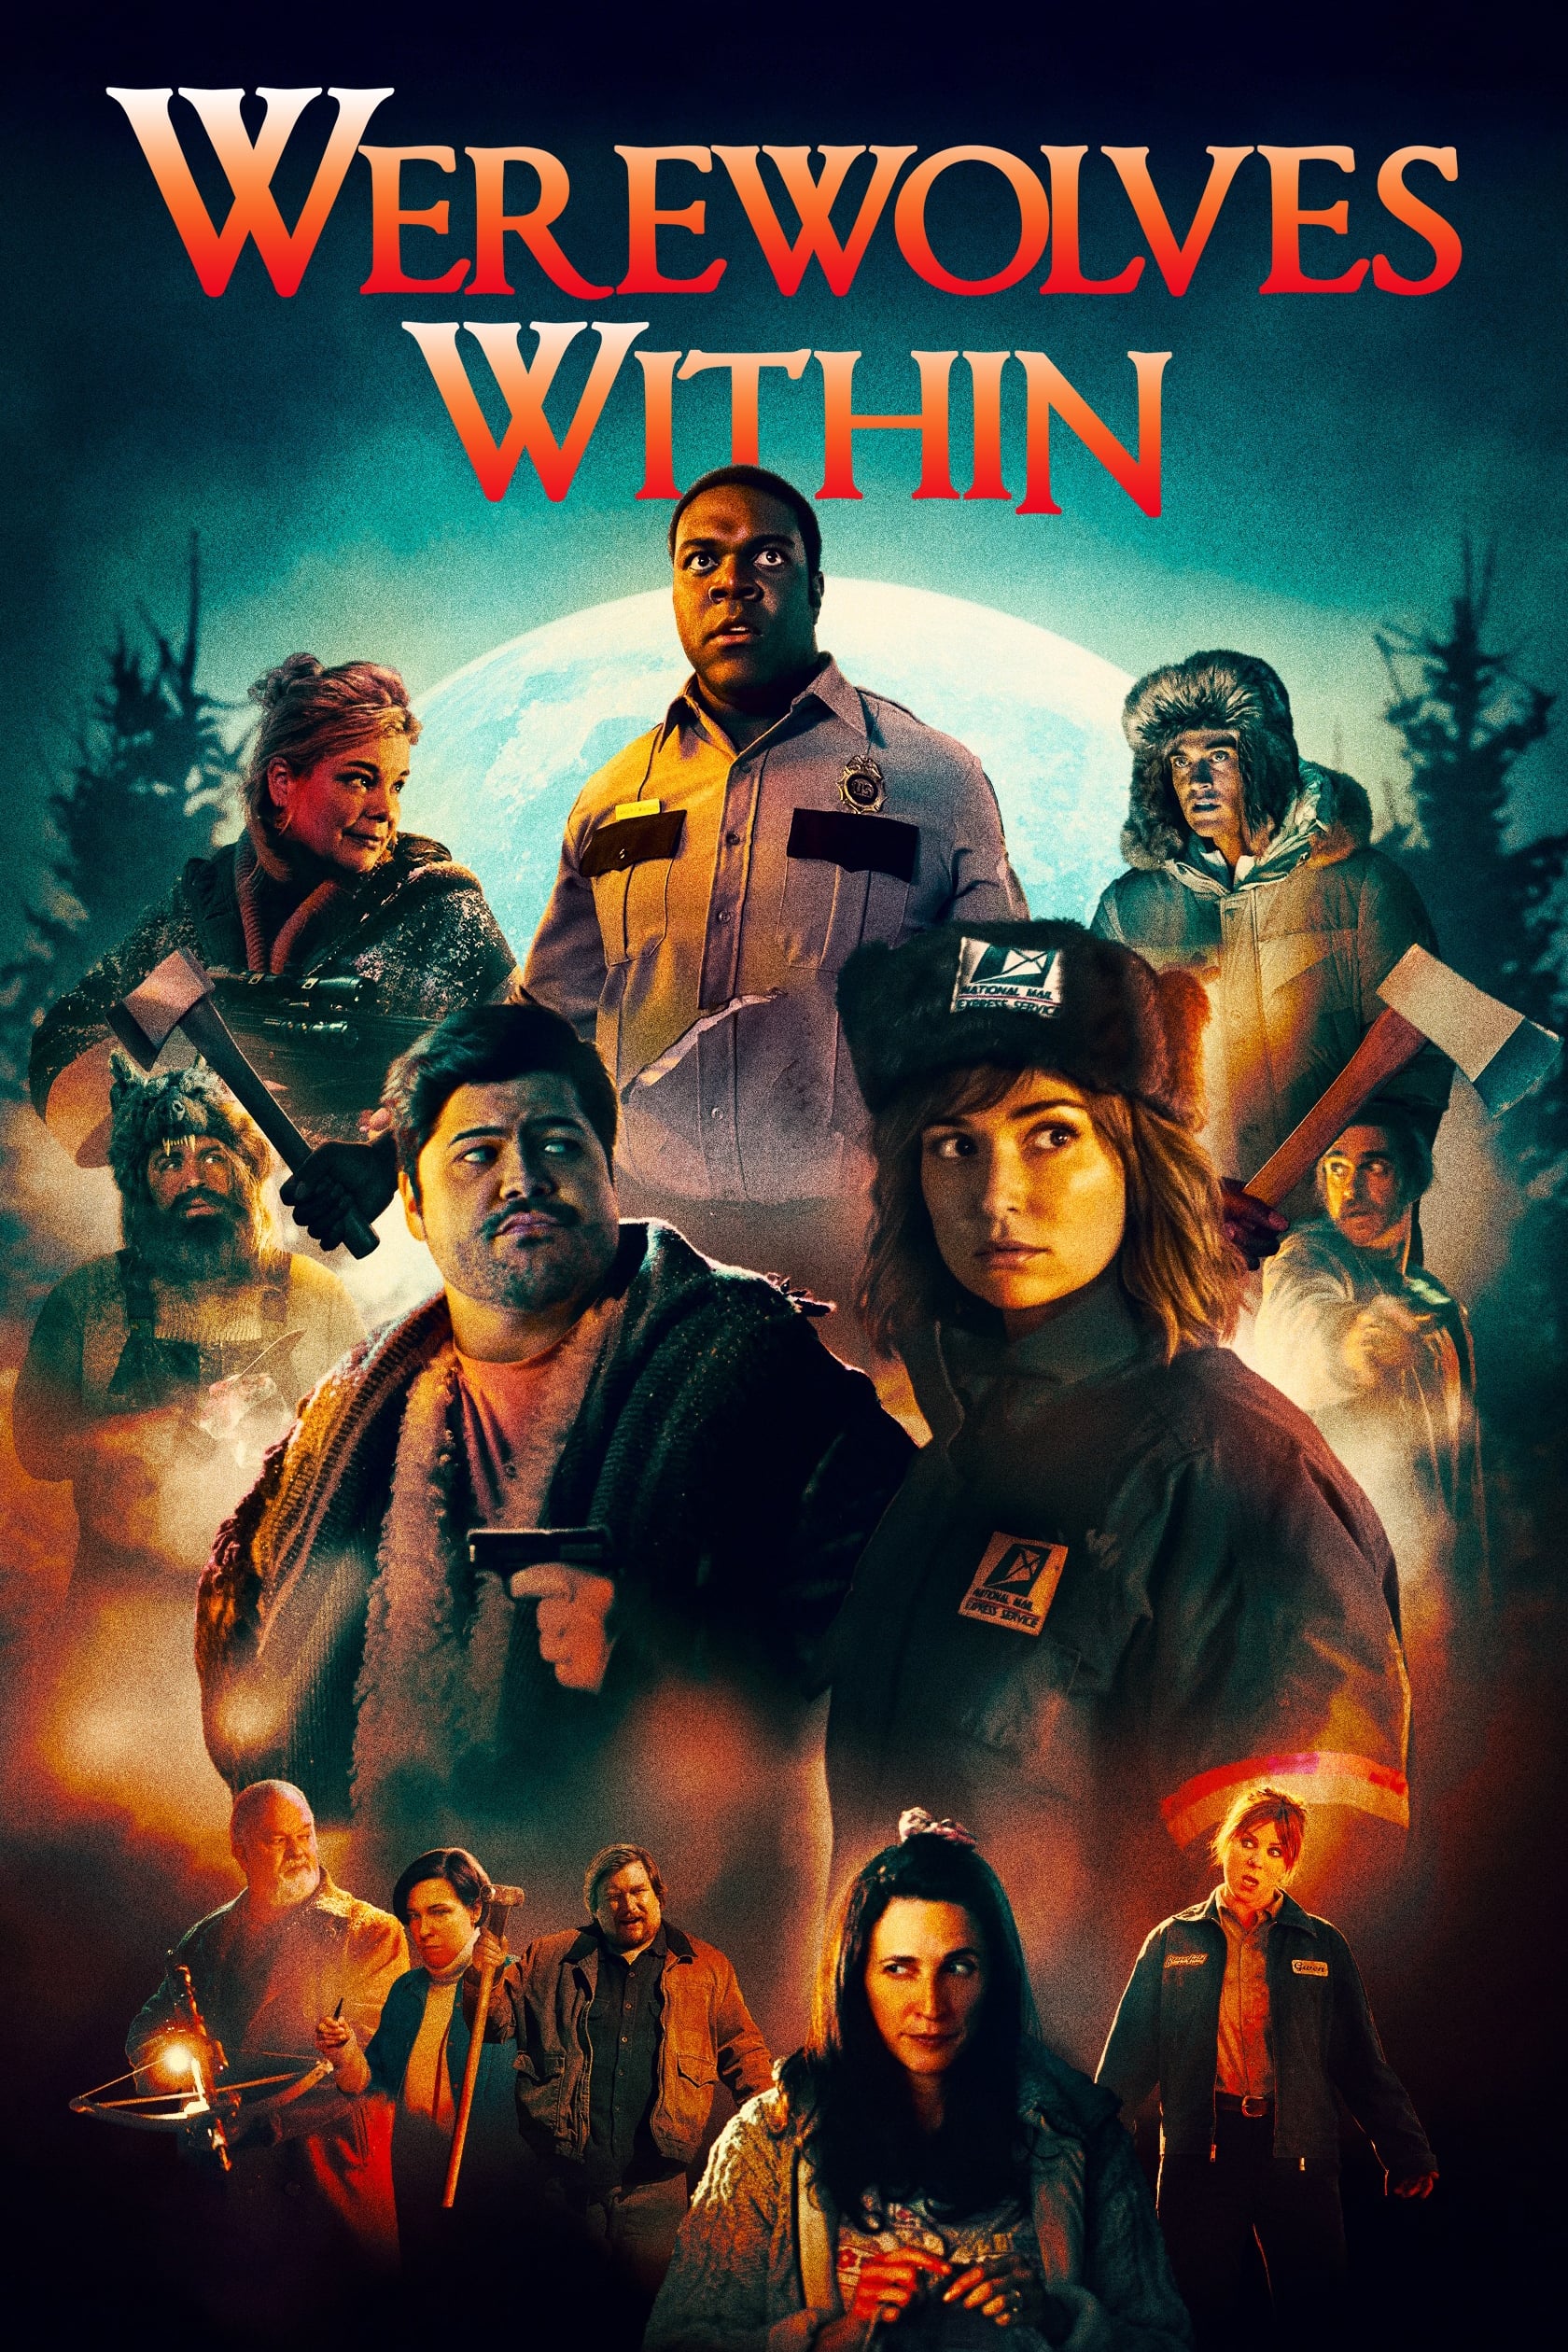 Werewolves Within Movie poster